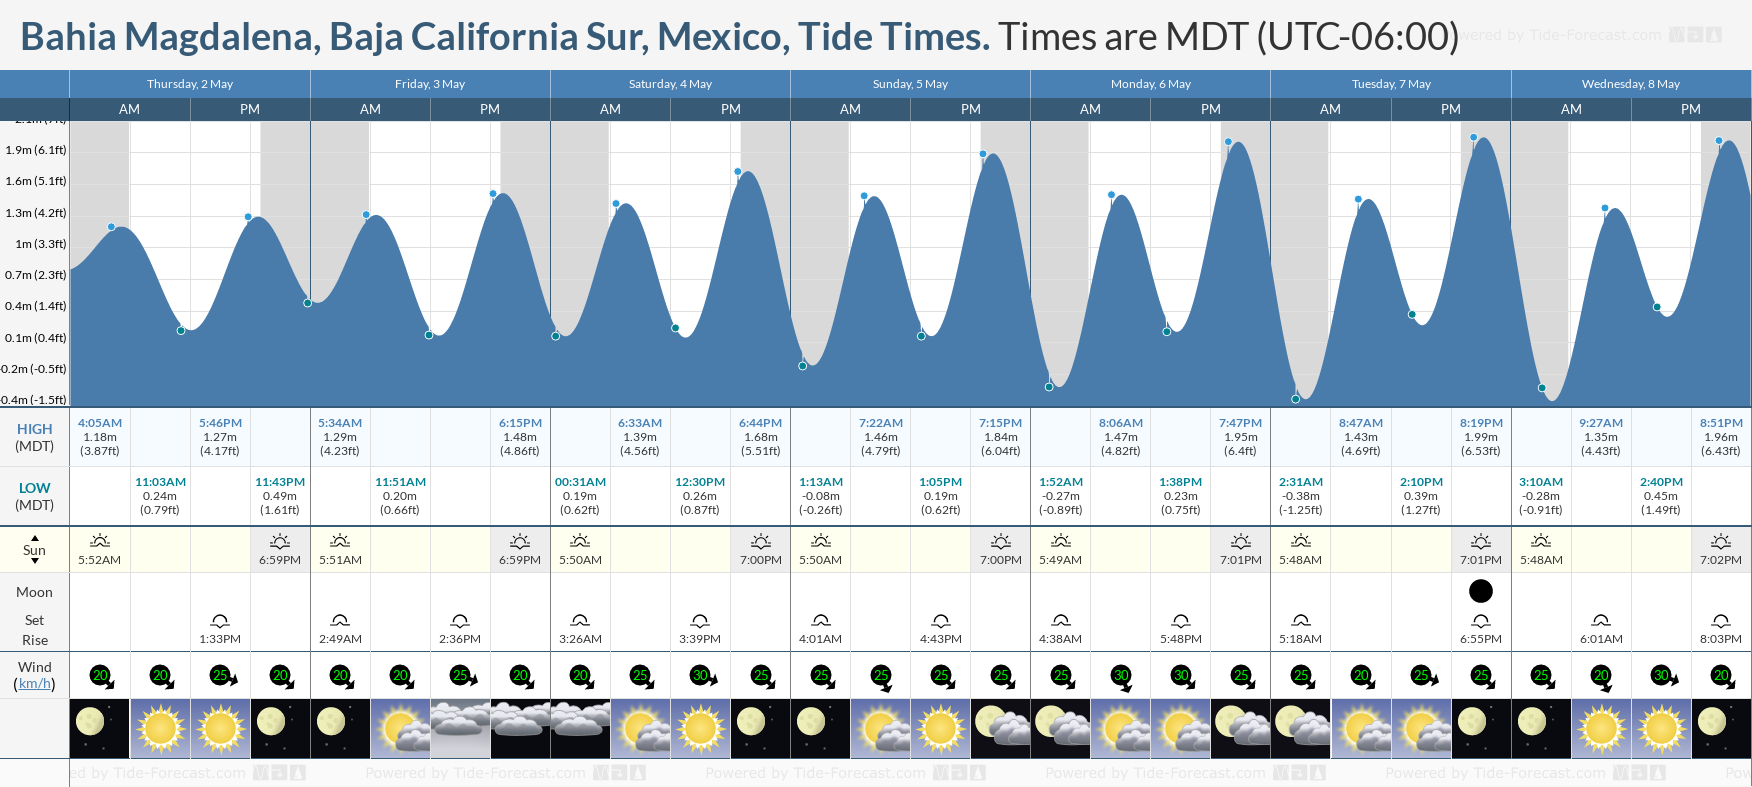 Bahia Magdalena, Baja California Sur, Mexico Tide Chart including high and low tide tide times for the next 7 days